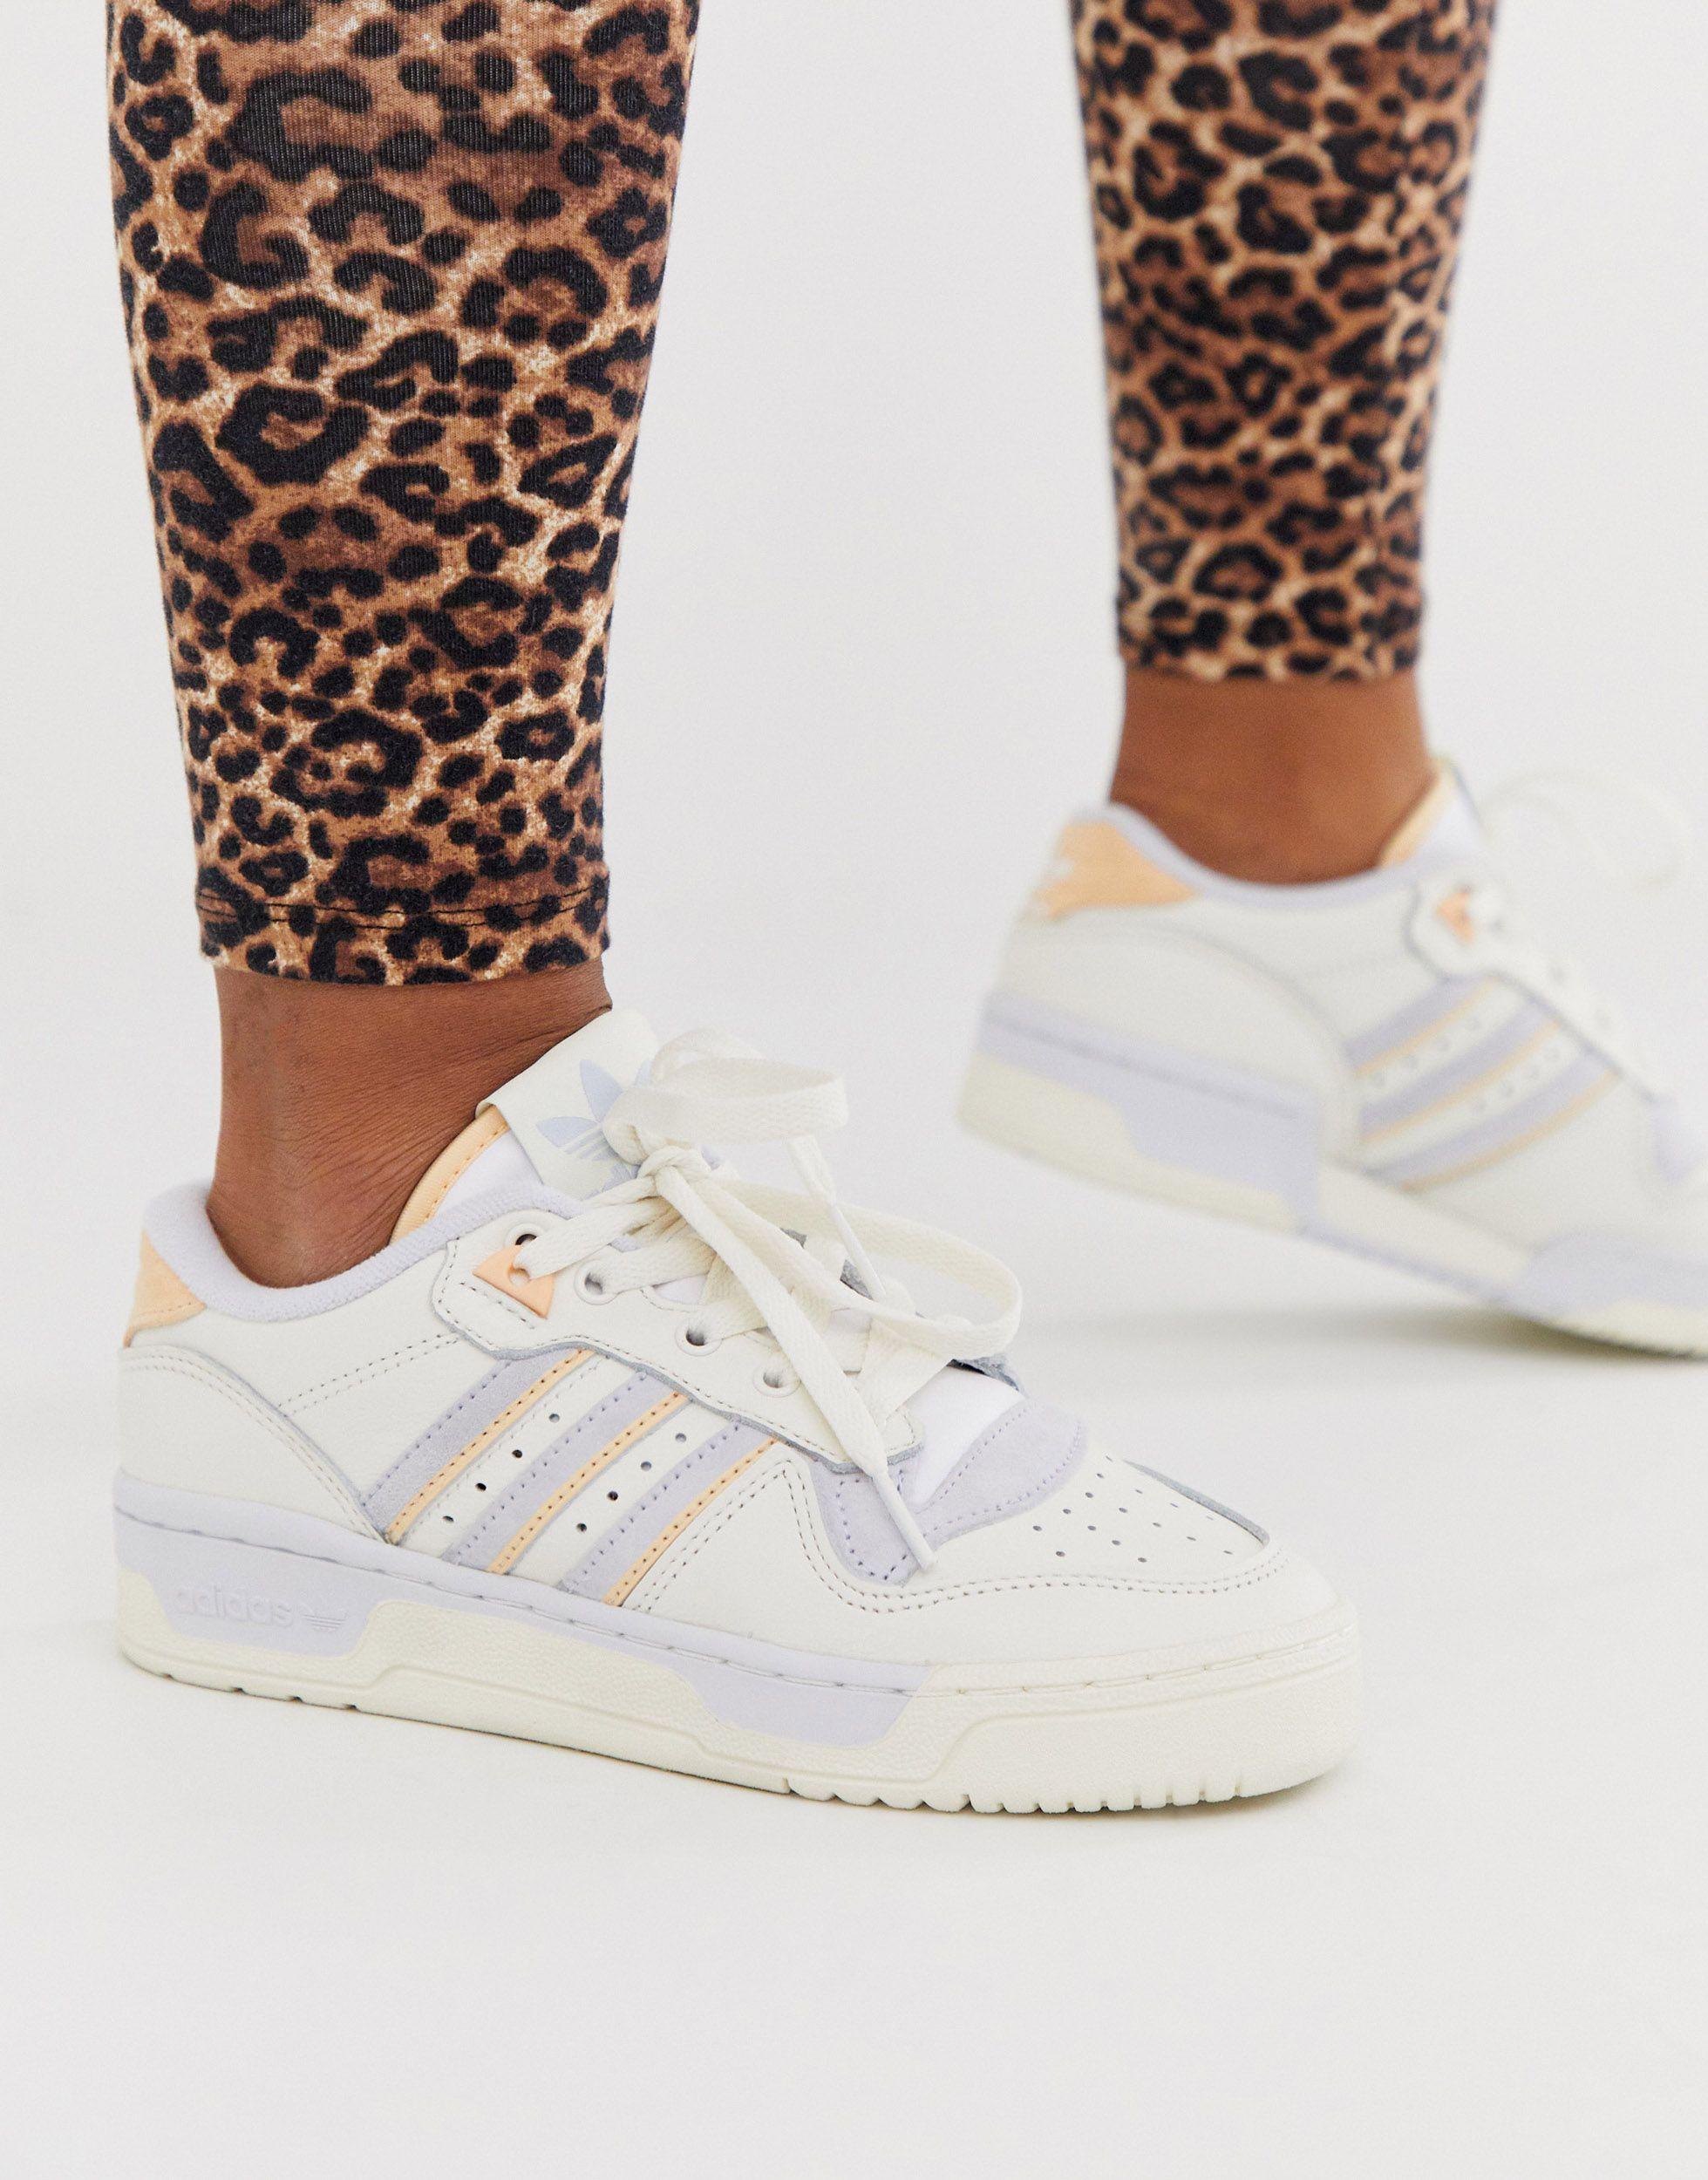 adidas originals rivalry low Shop Clothing & Shoes Online